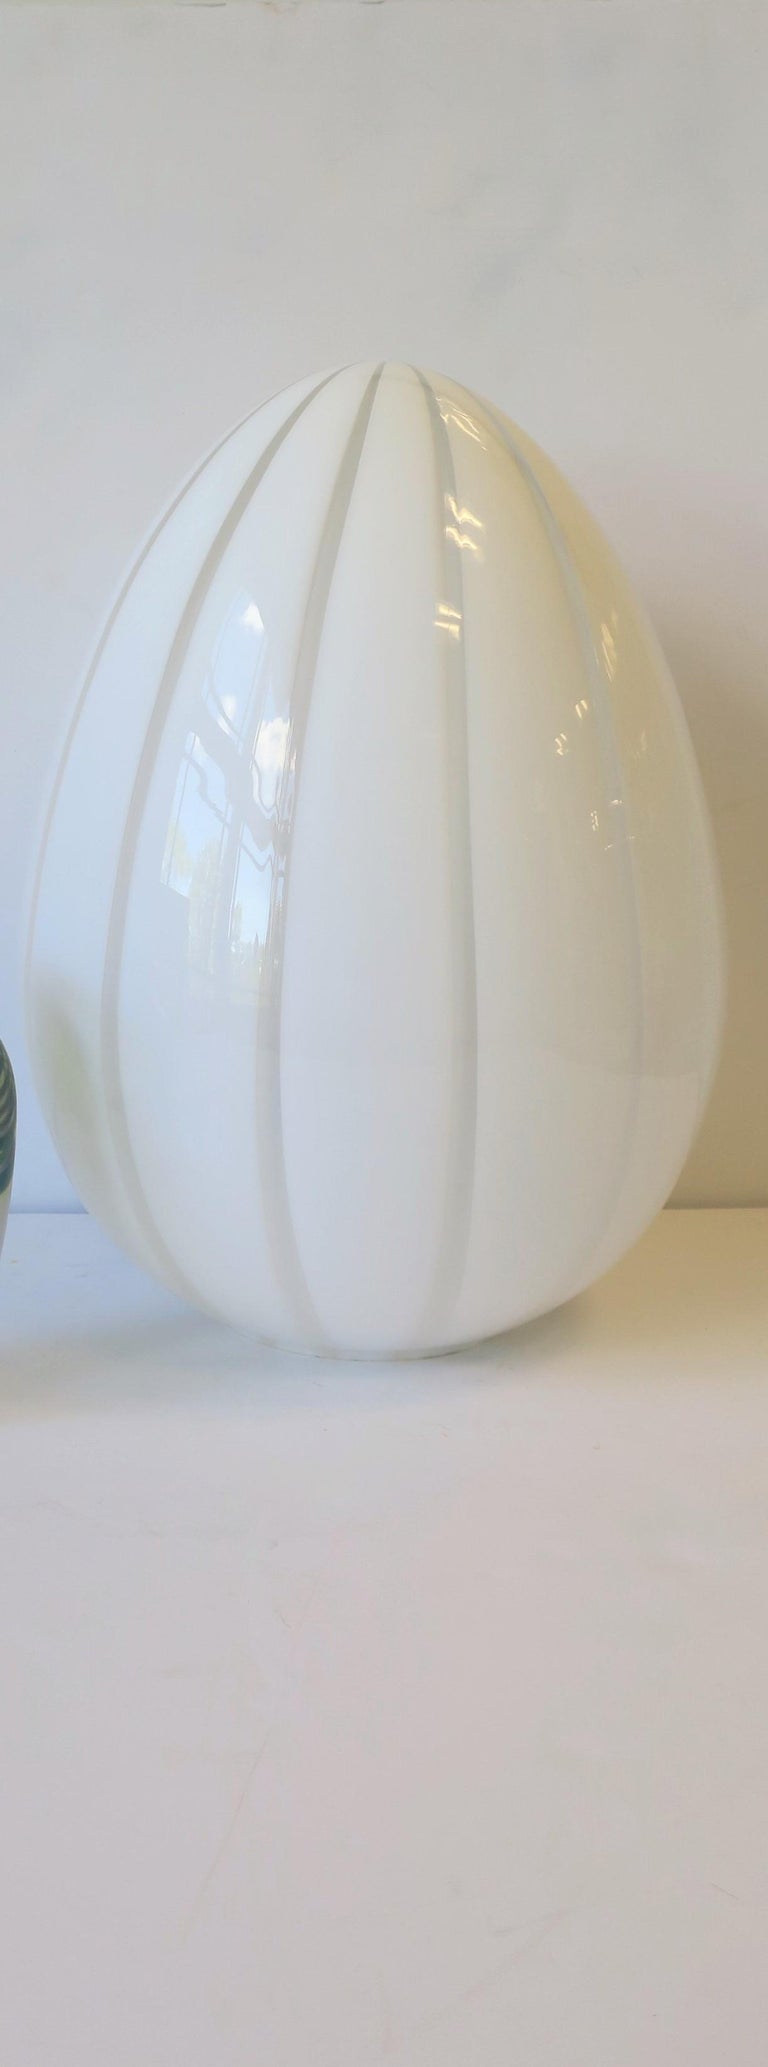 A beautiful Italian '70s Modern 'Vetri' Murano white and translucent art glass 'egg' table lamp, Italy, 1970s. Lamp is on a 'dimmer' switch offering various levels of light as show in image #12. Lamp is illuminated in images #4 and #10.

Lamp